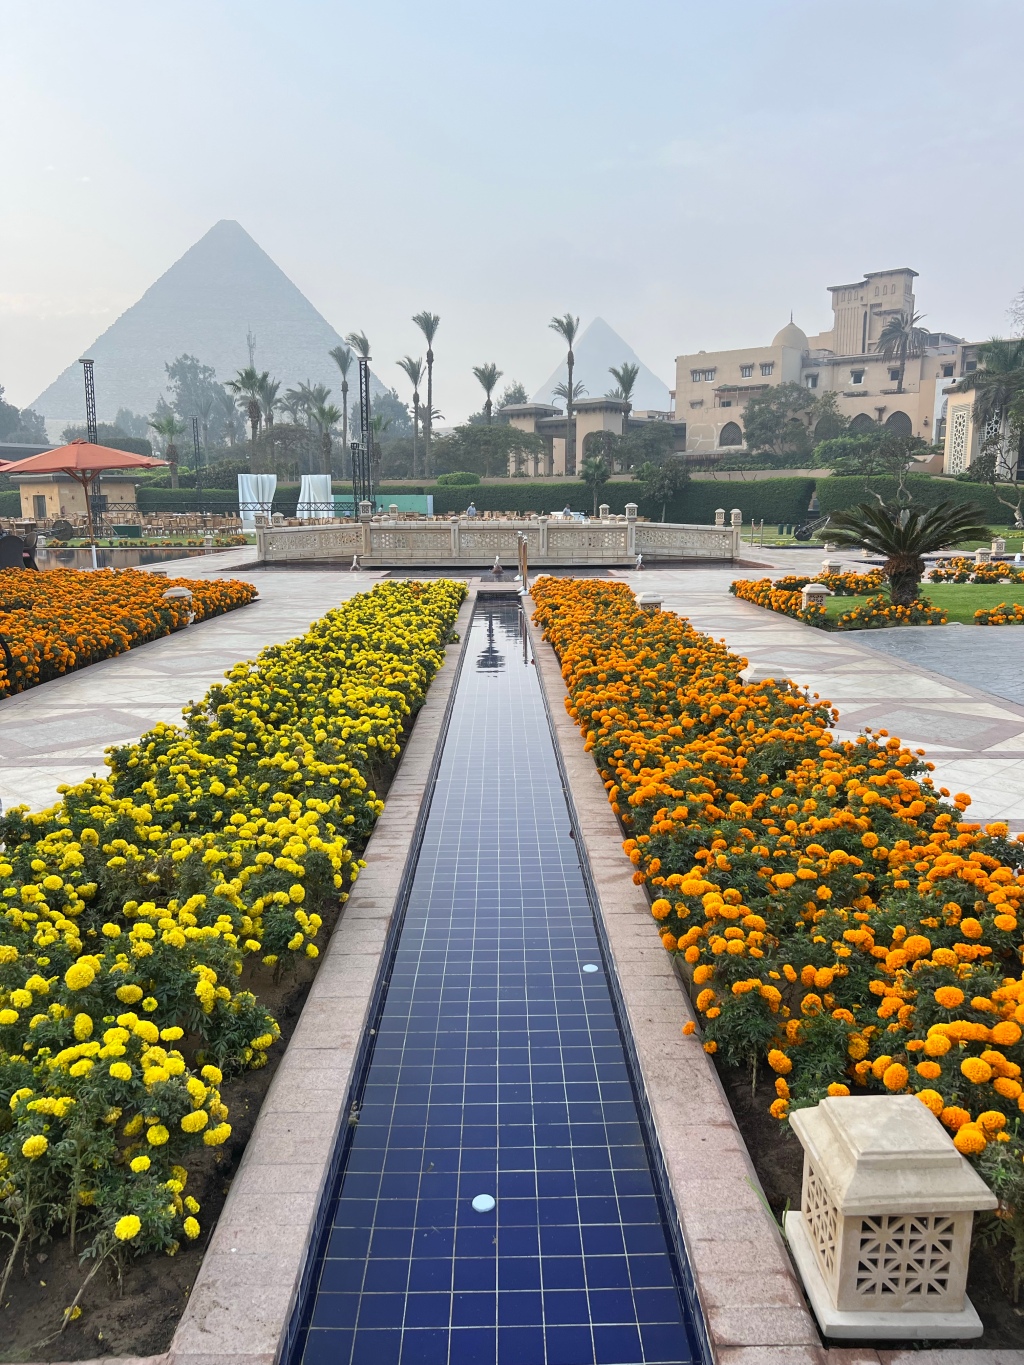 First impressions of Cairo